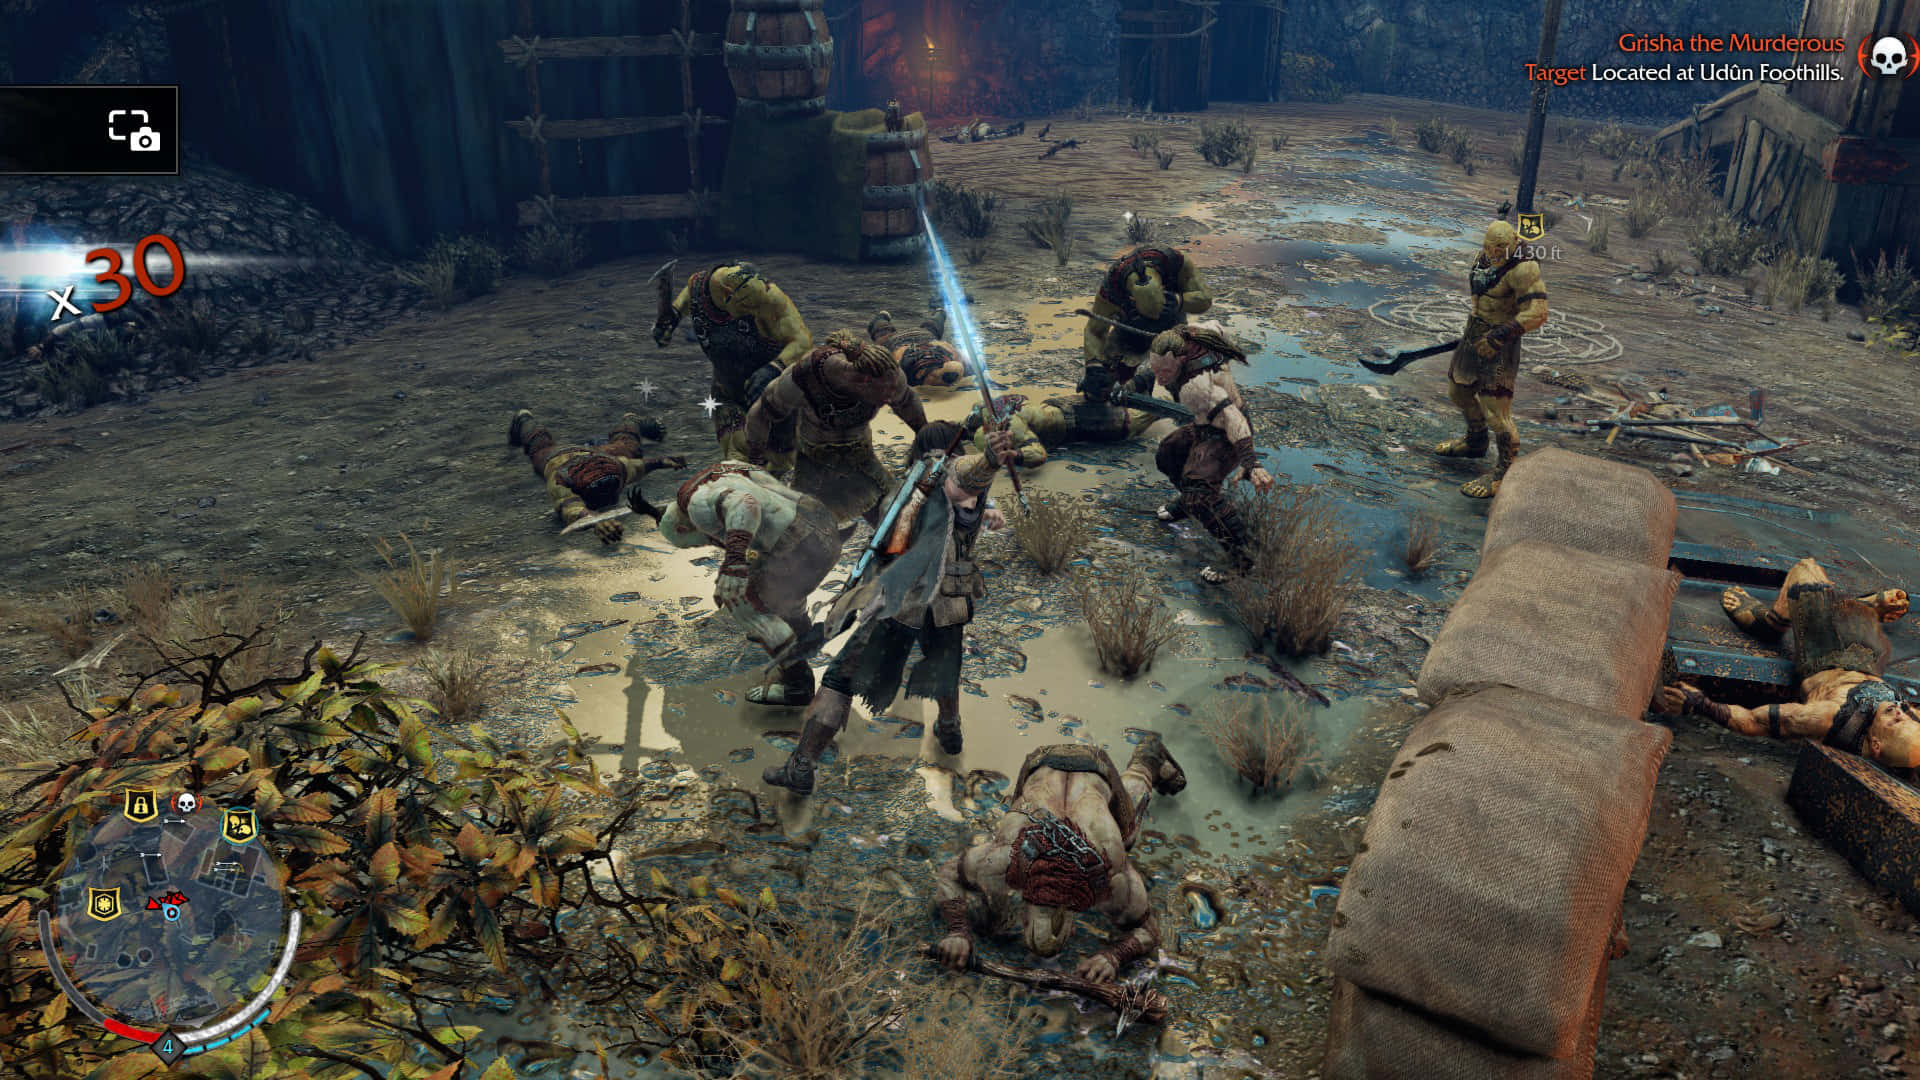 Feel the Power of Talion in Shadow of Mordor